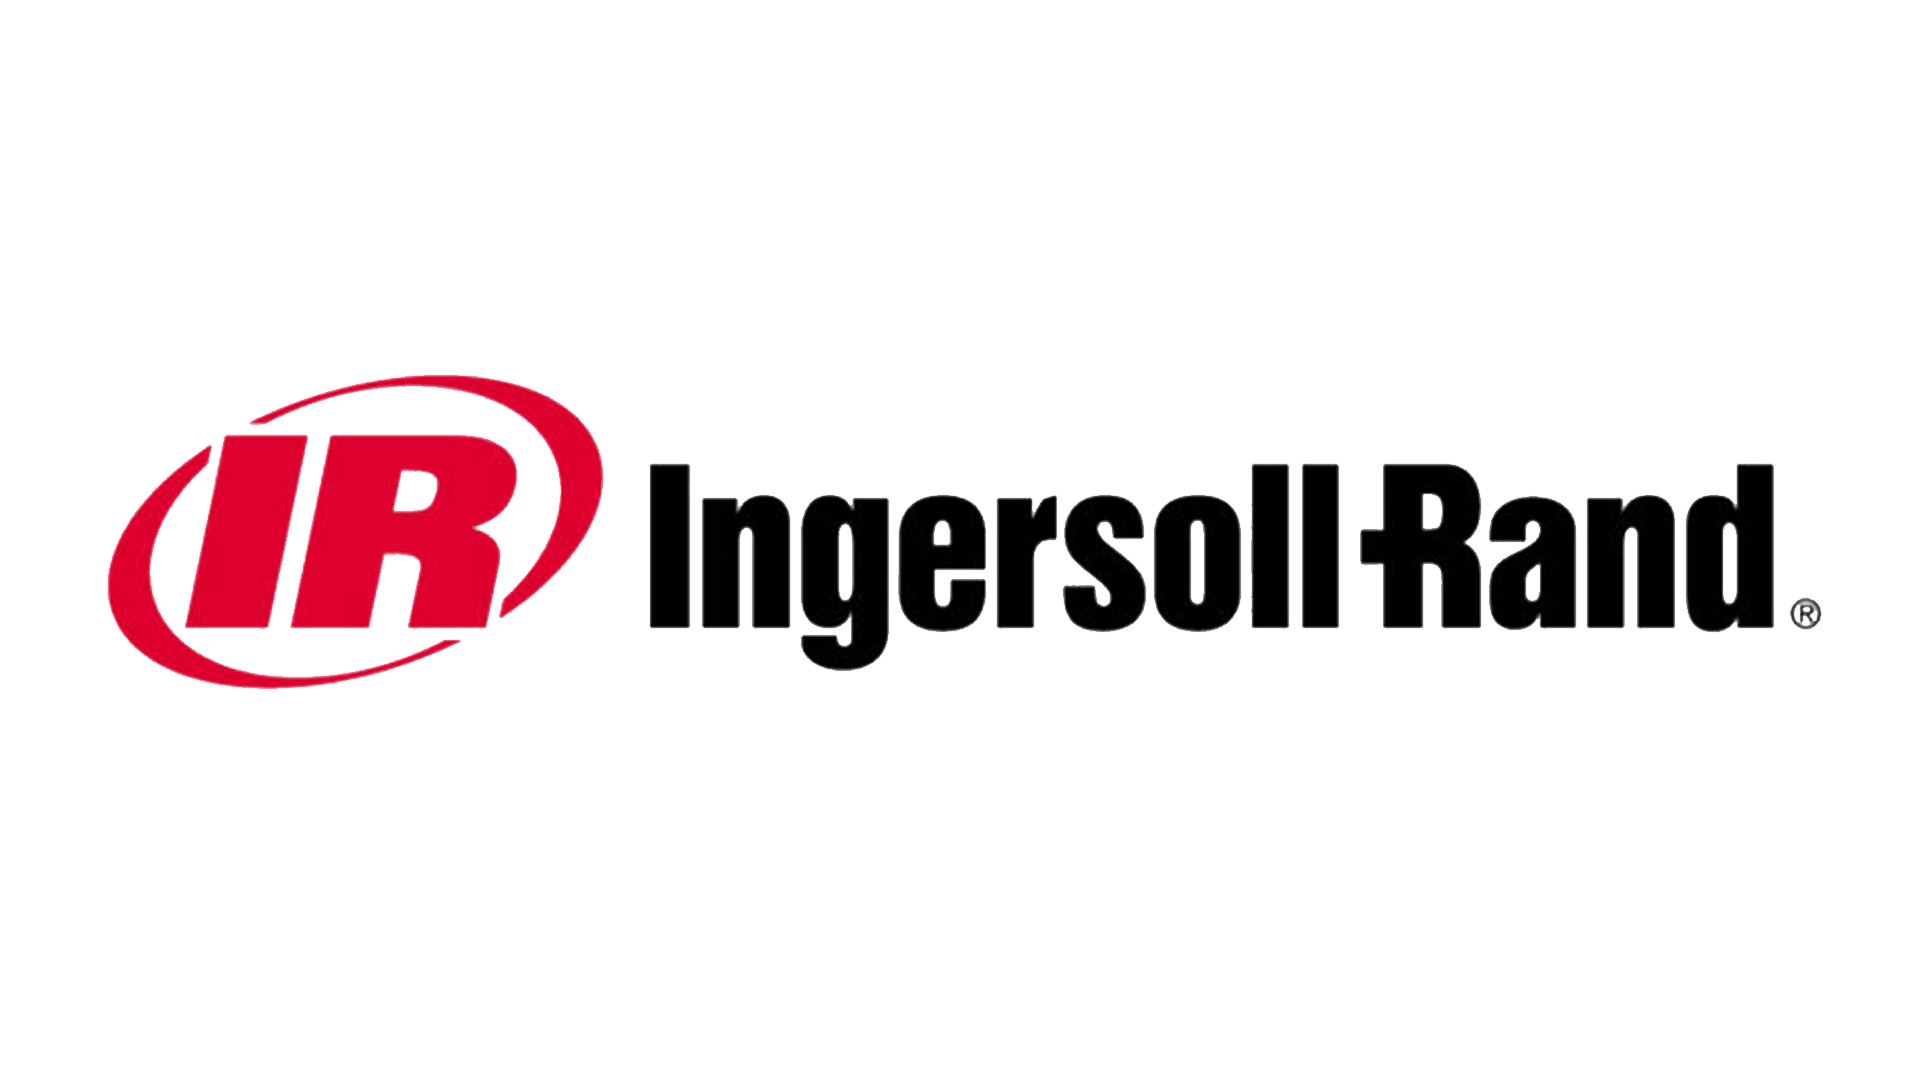 https://totalairtool.co.uk/wp-content/uploads/2019/01/Ingersoll-rand.png